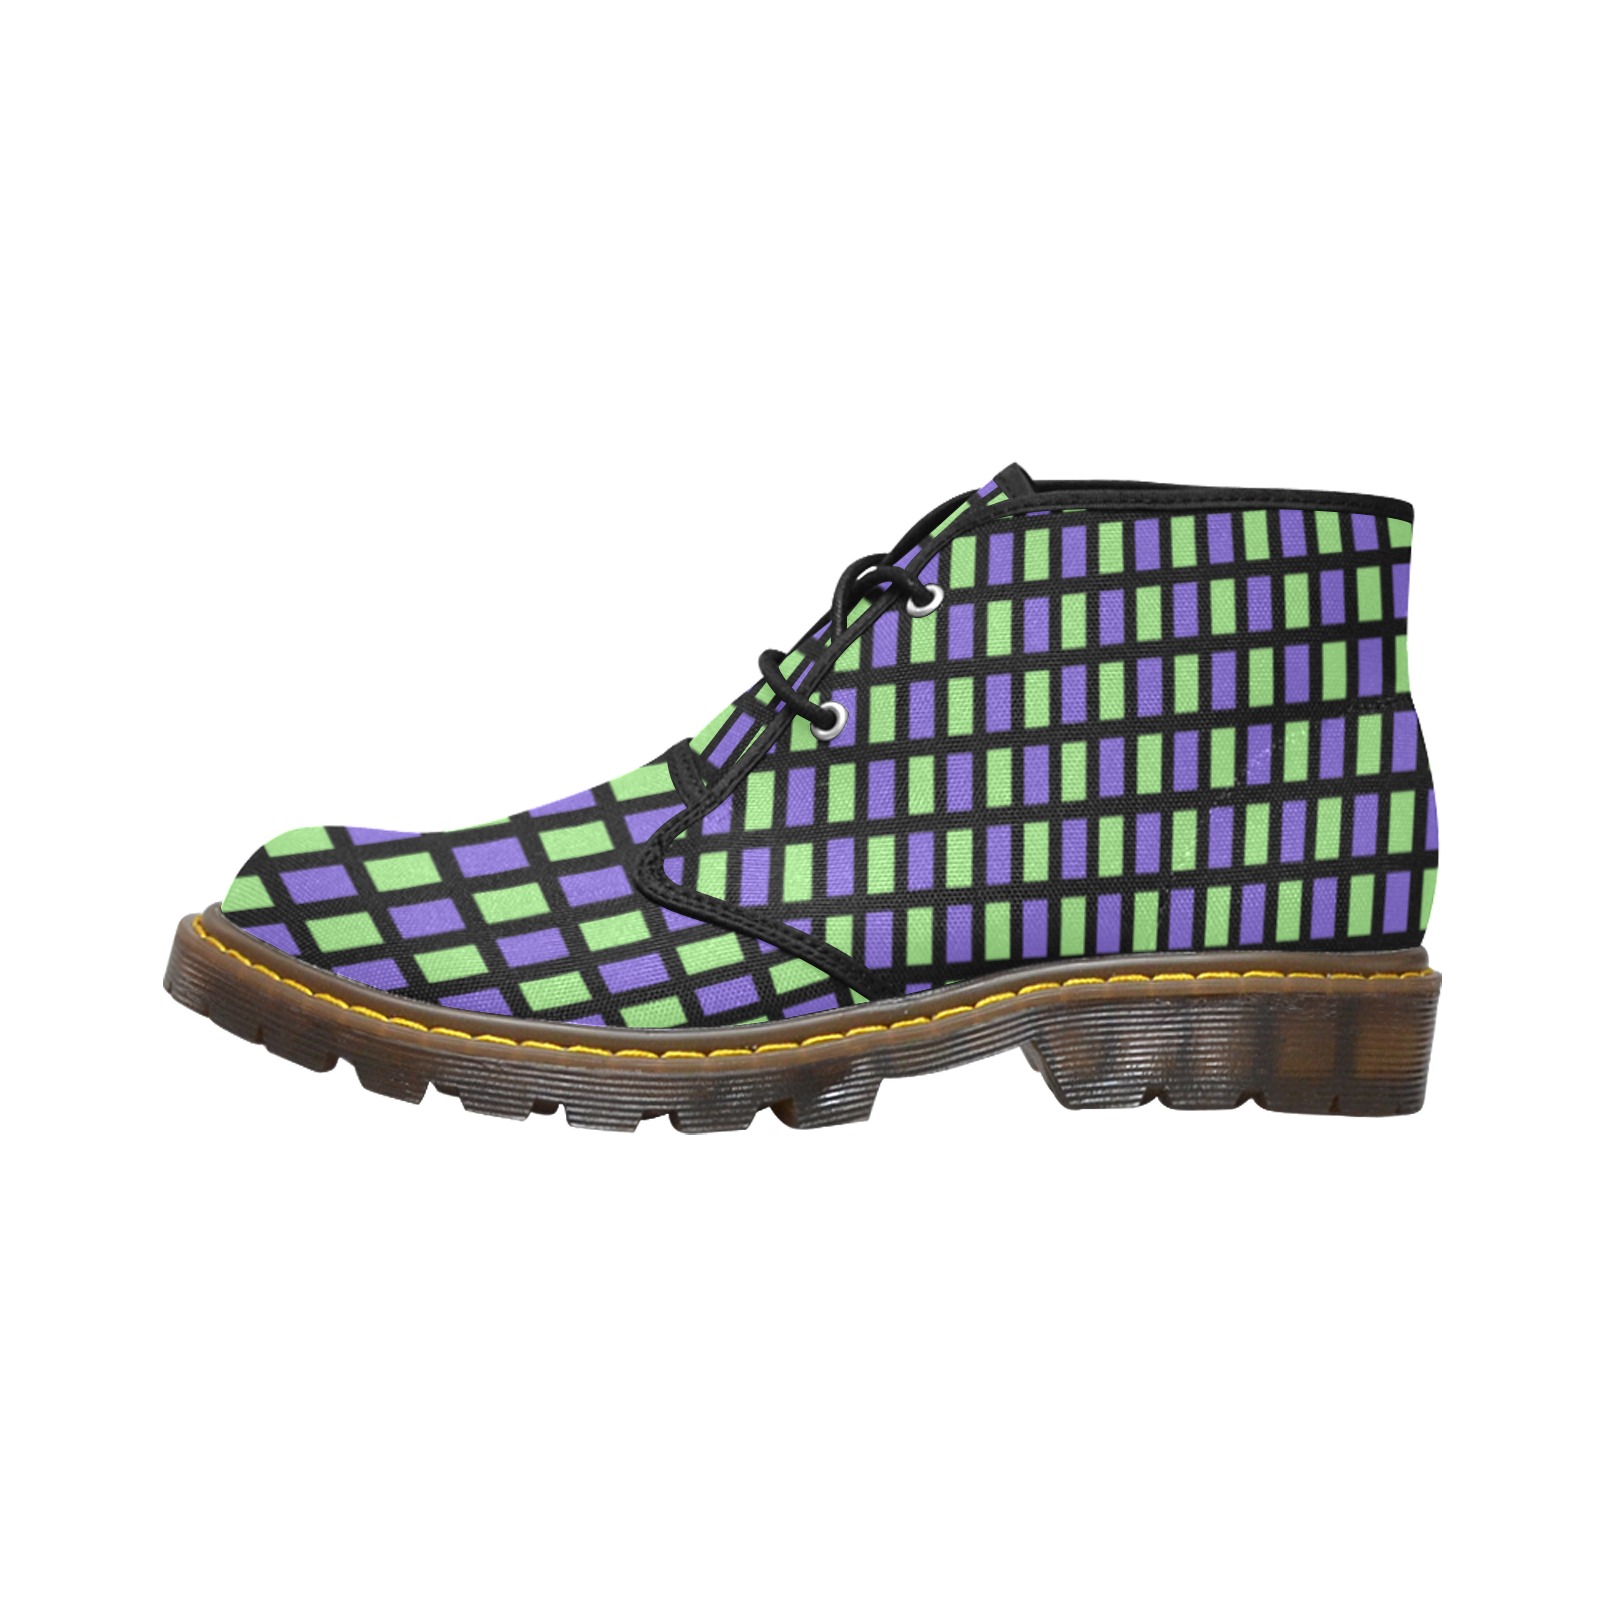 blue and green Men's Canvas Chukka Boots (Model 2402-1)